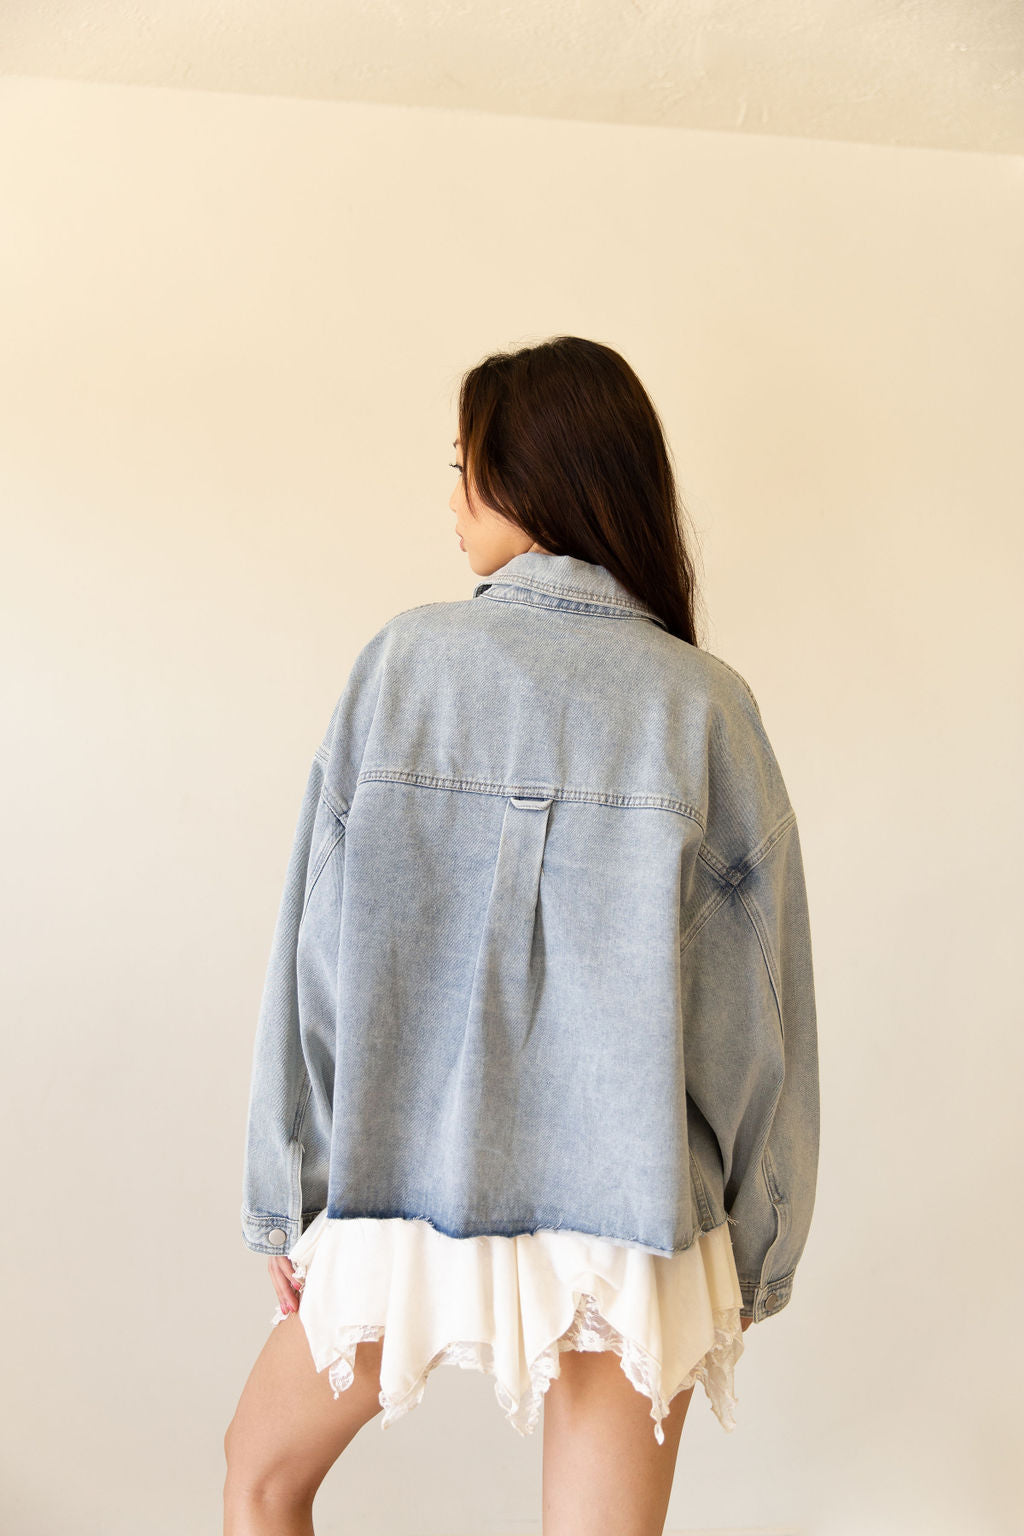 Alone Tonight Denim Jacket by For Good